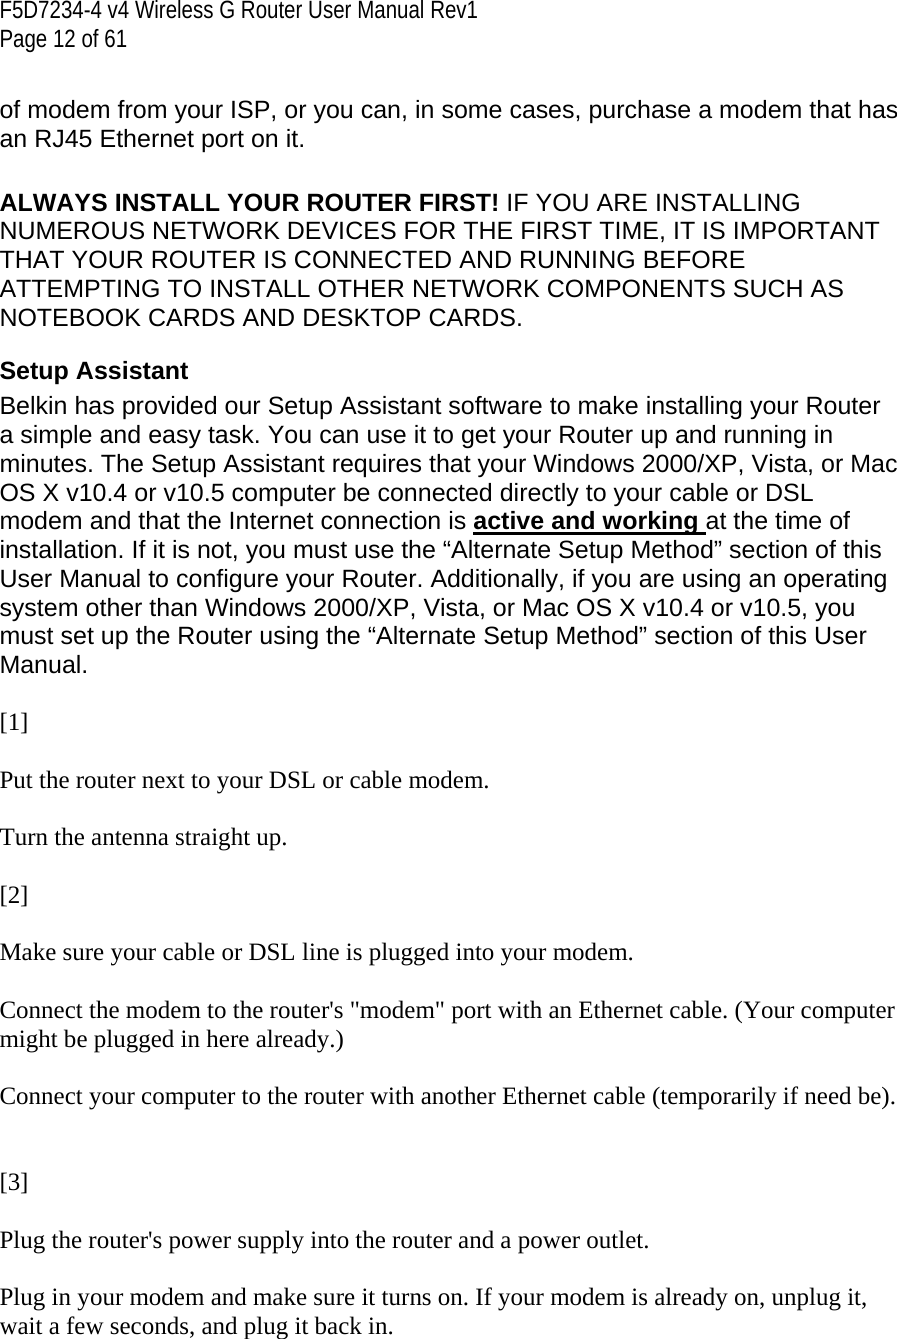 F5D7234-4 v4 Wireless G Router User Manual Rev1  Page 12 of 61   of modem from your ISP, or you can, in some cases, purchase a modem that has an RJ45 Ethernet port on it.  ALWAYS INSTALL YOUR ROUTER FIRST! IF YOU ARE INSTALLING NUMEROUS NETWORK DEVICES FOR THE FIRST TIME, IT IS IMPORTANT THAT YOUR ROUTER IS CONNECTED AND RUNNING BEFORE ATTEMPTING TO INSTALL OTHER NETWORK COMPONENTS SUCH AS NOTEBOOK CARDS AND DESKTOP CARDS. Setup Assistant Belkin has provided our Setup Assistant software to make installing your Router a simple and easy task. You can use it to get your Router up and running in minutes. The Setup Assistant requires that your Windows 2000/XP, Vista, or Mac OS X v10.4 or v10.5 computer be connected directly to your cable or DSL modem and that the Internet connection is active and working at the time of installation. If it is not, you must use the “Alternate Setup Method” section of this User Manual to configure your Router. Additionally, if you are using an operating system other than Windows 2000/XP, Vista, or Mac OS X v10.4 or v10.5, you must set up the Router using the “Alternate Setup Method” section of this User Manual.  [1]  Put the router next to your DSL or cable modem.  Turn the antenna straight up.  [2]  Make sure your cable or DSL line is plugged into your modem.  Connect the modem to the router&apos;s &quot;modem&quot; port with an Ethernet cable. (Your computer might be plugged in here already.)  Connect your computer to the router with another Ethernet cable (temporarily if need be).   [3]  Plug the router&apos;s power supply into the router and a power outlet.  Plug in your modem and make sure it turns on. If your modem is already on, unplug it, wait a few seconds, and plug it back in.  